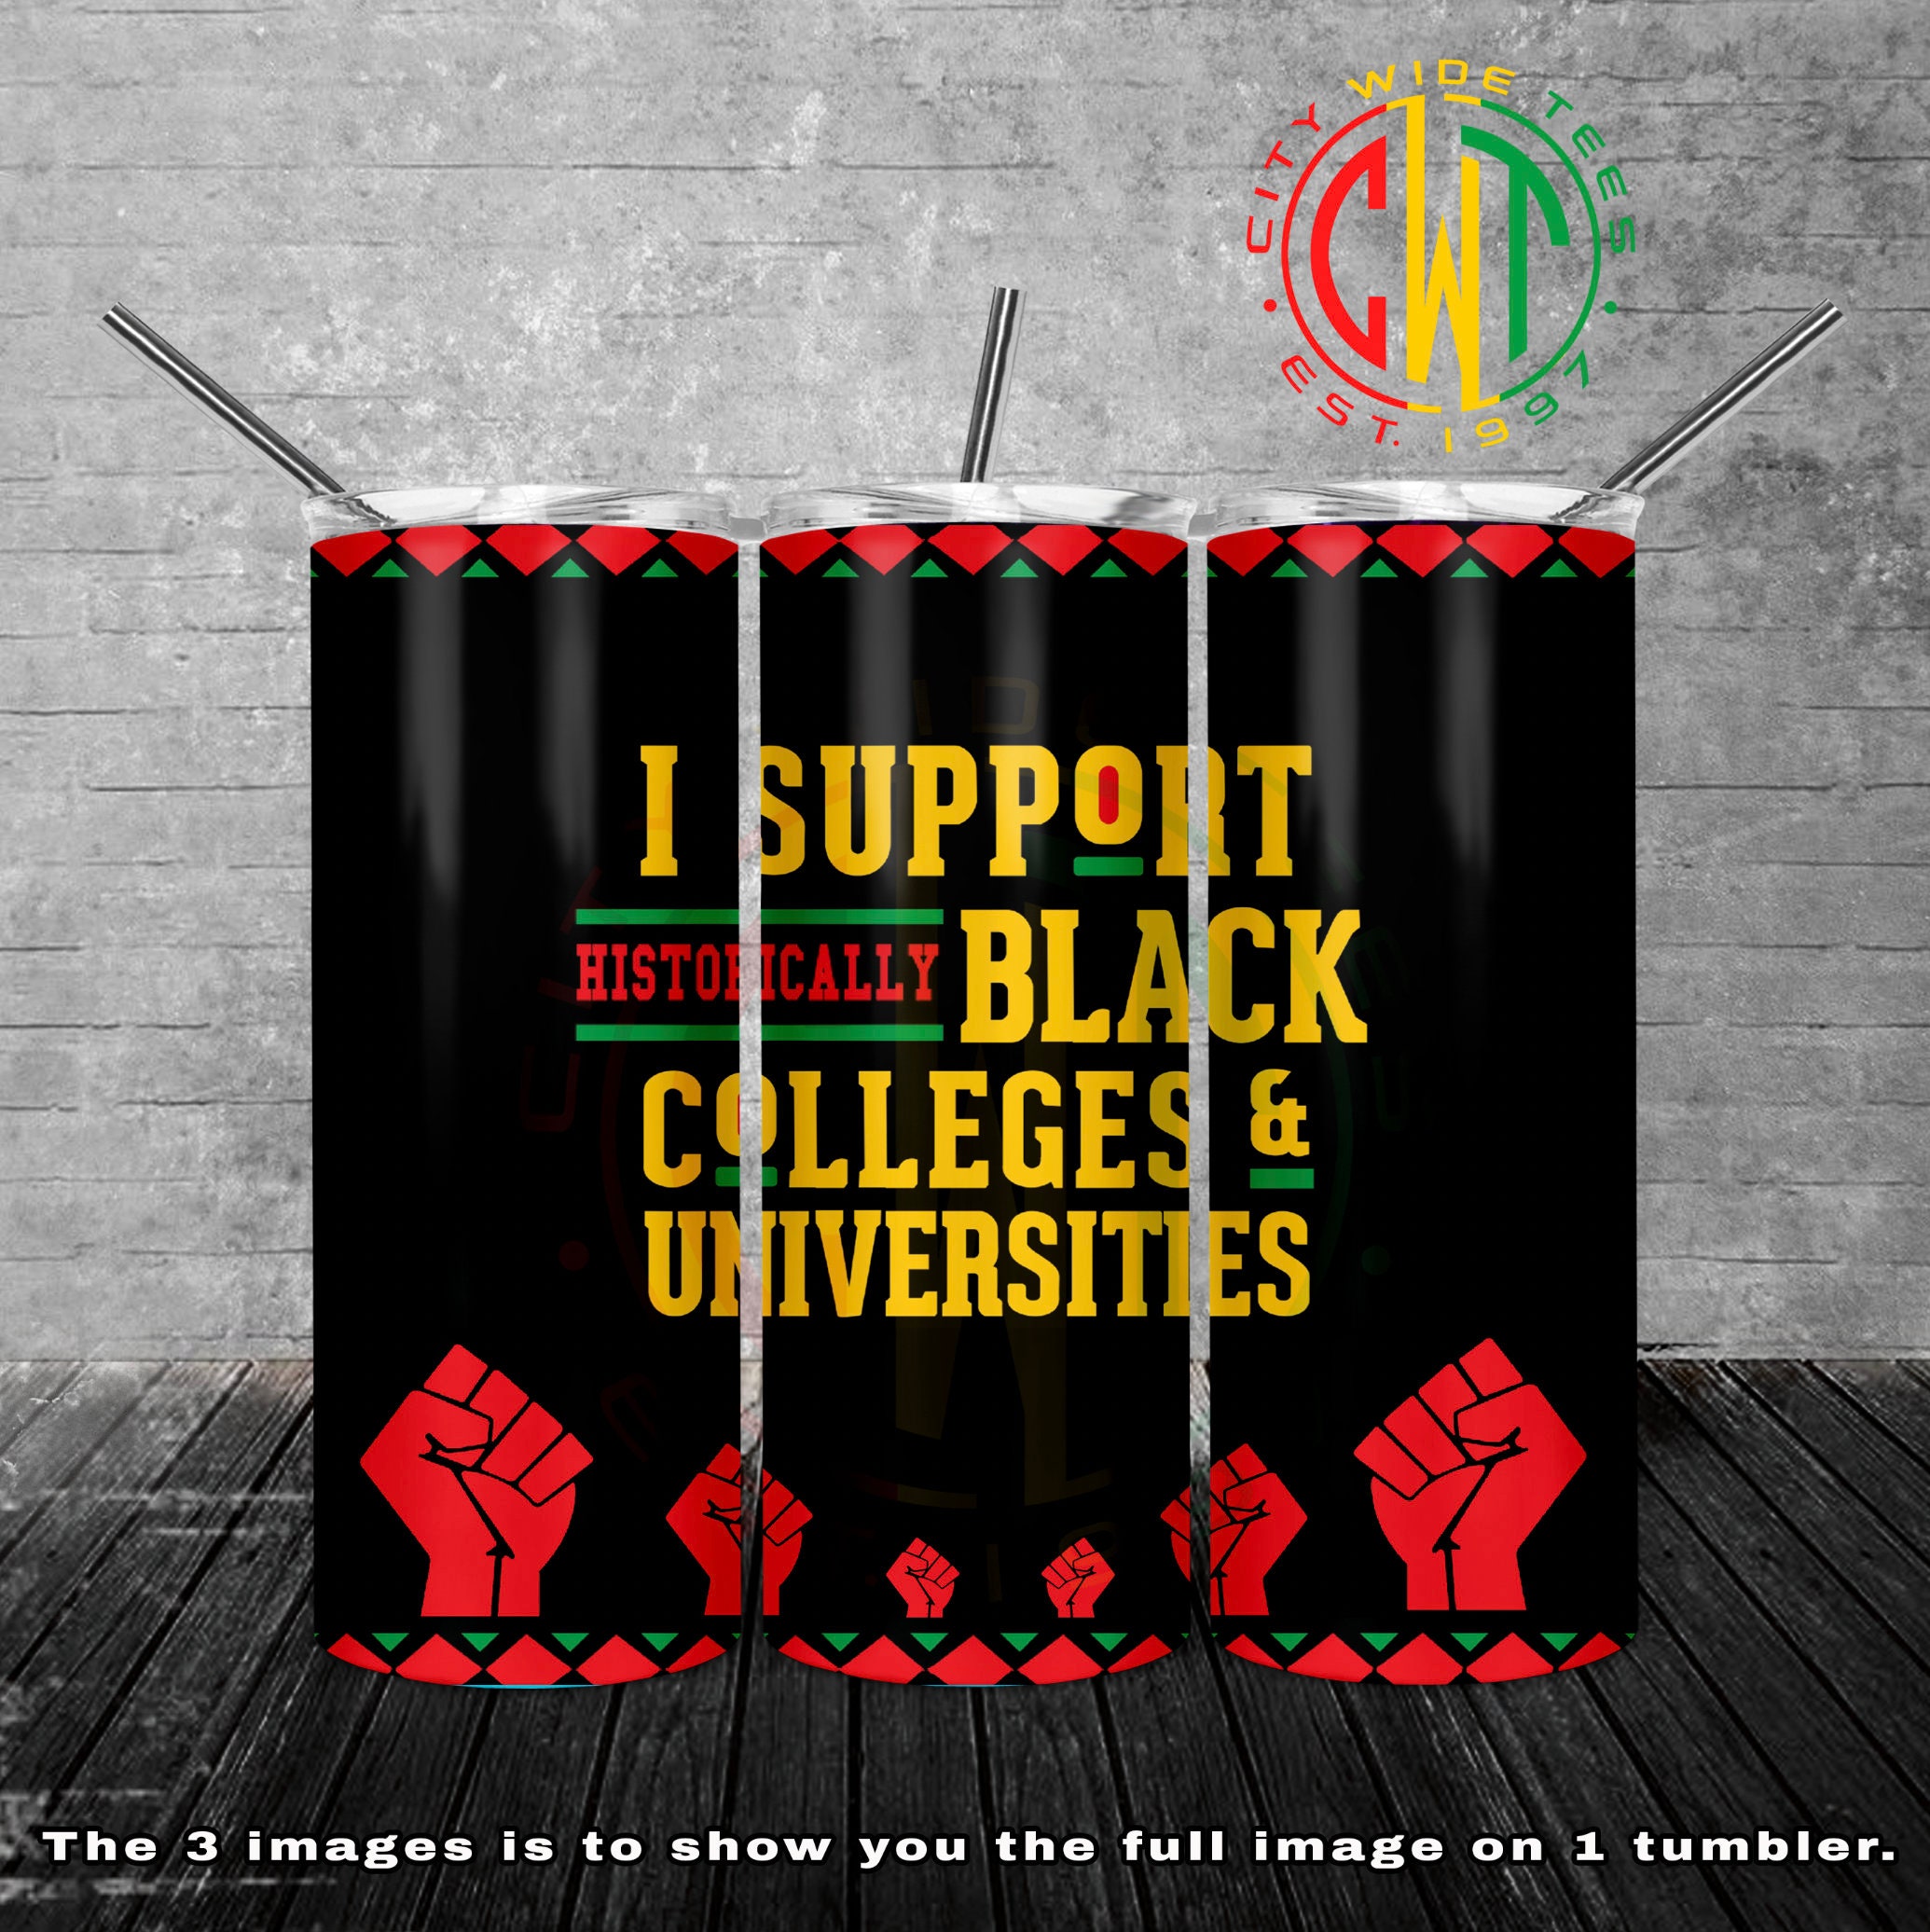 Support Black Colleges Knowledge Hoodie Sweatshirt  Urban Outfitters Japan  - Clothing, Music, Home & Accessories